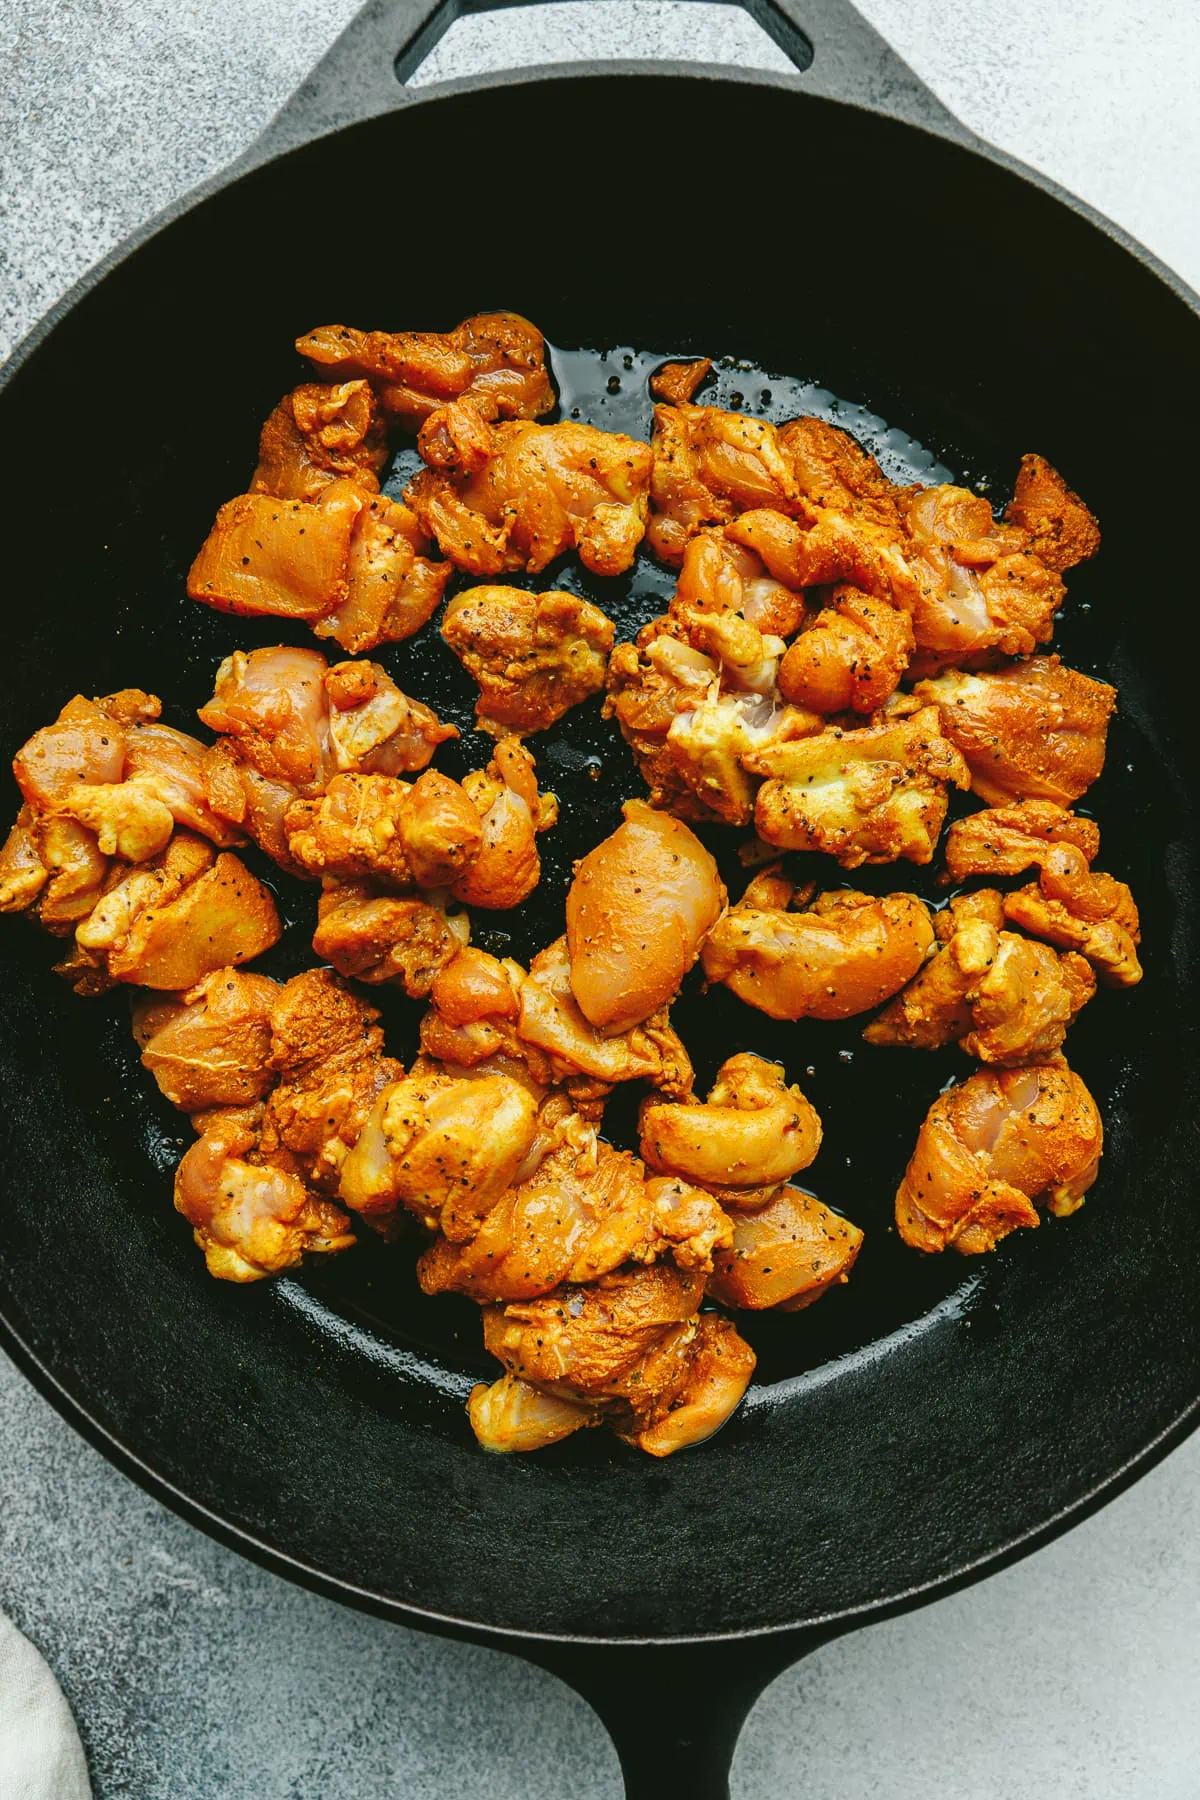 Chicken thighs seasoned in turmeric black pepper in a cast iron skillet.